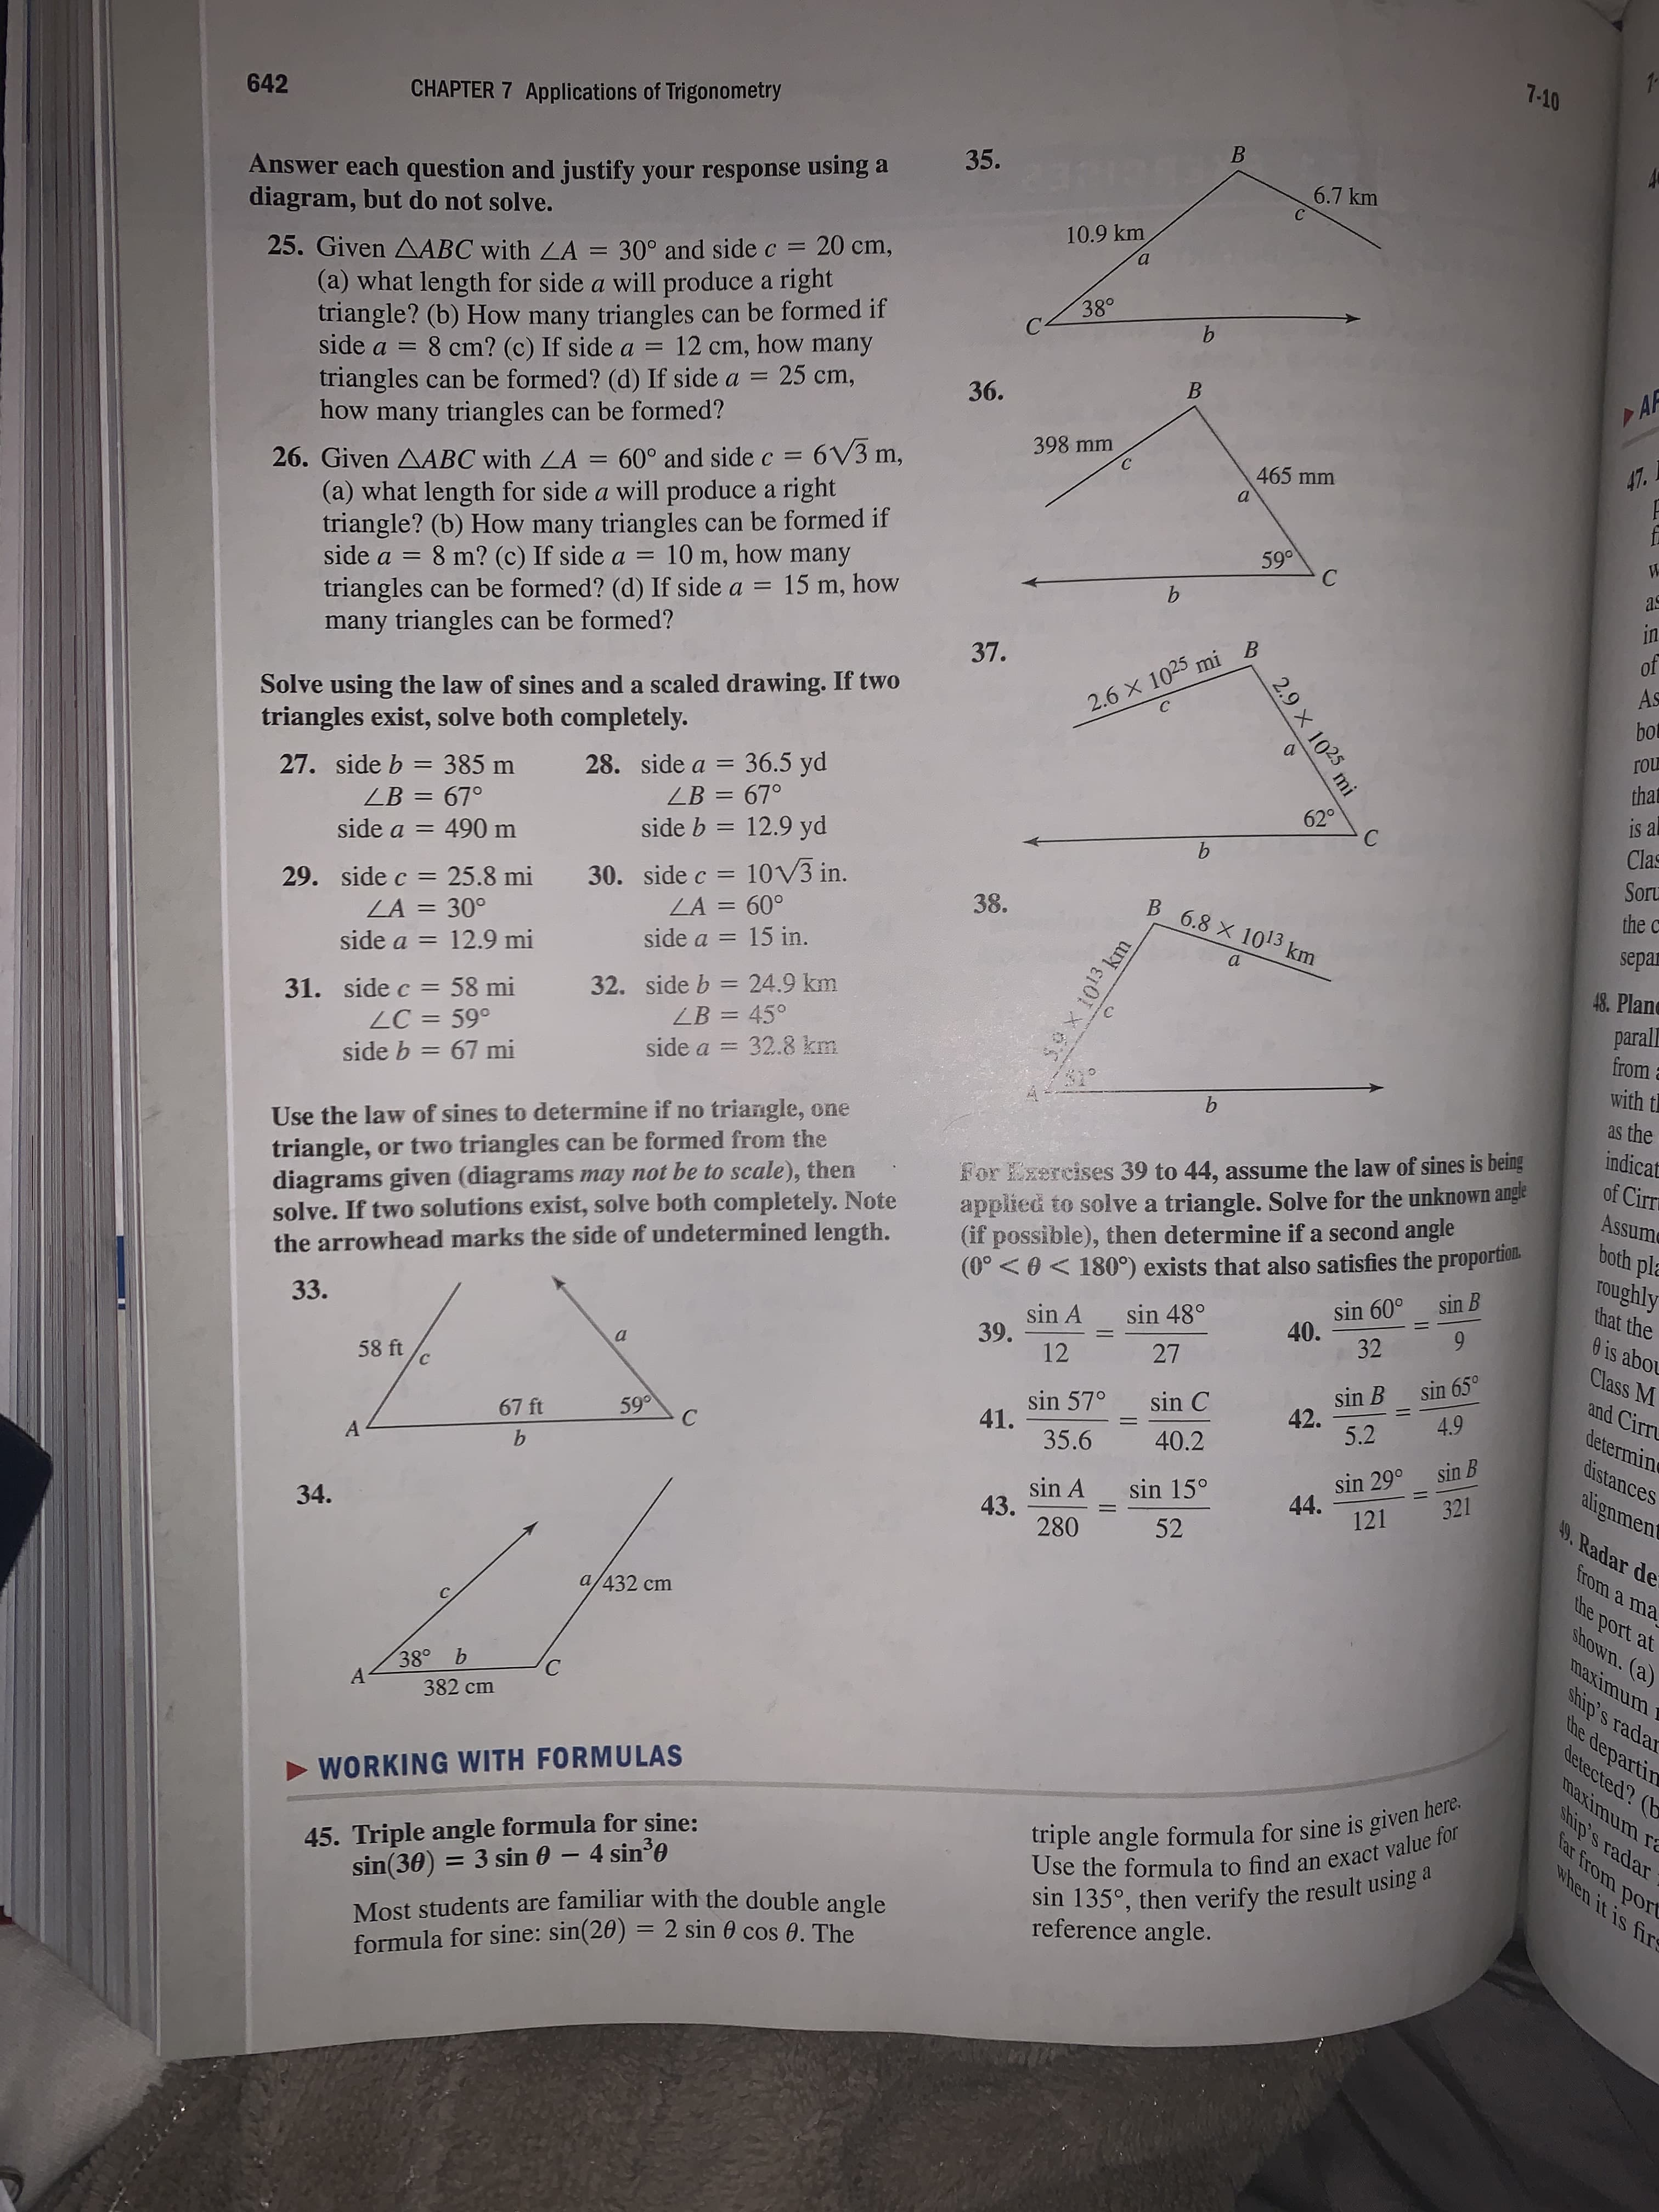 7-10
642
CHAPTER 7 Applications of Trigonometry
35.
Answer each question and justify your response using a
diagram, but do not solve.
6.7 km
10.9 km
a.
25. Given AABC with LA =
(a) what length for side a will produce a right
triangle? (b) How many triangles can be formed if
side a = 8 cm? (c) If side a = 12 cm, how many
triangles can be formed? (d) If side a = 25 cm,
how many triangles can be formed?
30° and side c = 20 cm,
38°
B
AF
36.
398 mm
= 6V3 m,
47.
465 mm
26. Given AABC with LA = 60° and side c =
(a) what length for side a will produce a right
triangle? (b) How many triangles can be formed if
side a = 8 m? (c) If side a = 10 m, how many
triangles can be formed? (d) If side a = 15 m, how
many triangles can be formed?
59°
as
b.
in
of
37.
As
Solve using the law of sines and a scaled drawing. If two
triangles exist, solve both completely.
2.6 x 1025 mi B
bot
ГOL
that
28. side a = 36.5 yd
ZB = 67°
%3D
27. side b = 385 m
ZB = 67°
is al
Clas
62°
%3D
%3D
side b = 12.9 yd
side a = 490 m
Soru
30. side c = 10V3 in.
ZA = 60°
the c
29. side c = 25.8 mi
ZA = 30°
side a = 12.9 mi
38.
B 6.8 X 1013 km
separ
side a = 15 in.
a.
%3D
48. Plane
31. side c = 58 mi
ZC = 59°
32. side b = 24.9 km
LB = 45°
parall
from
with th
%3D
side a = 32.8 km
side b = 67 mi
b.
as the
indicat
triangle, or two triangles can be formed from the
diagrams given (diagrams may not be to scale), then
solve. If two solutions exist, solve both completely. Note
the arrowhead marks the side of undetermined length.
Use the law of sines to determine if no triangle, one
of Cirr
applied to solve a triangle. Solve for the unknown angle
(if possible), then determine if a second angle
(0° < 0 < 180°) exists that also satisfies the proportion.
For Exercises 39 to 44, assume the law of sines is being
Assume
both pla
roughly
that the
sin B
sin 60°
40.
sin 48°
sin A
39.
12
33.
32
0 is abou
27
Class M
sin 65°
sin B
42.
5.2
58 ft
and Cirru
sin C
sin 57°
41.
4.9
determine
59°
%3D
67 ft
35.6
40.2
sin 29° sin B
44.
distances
A
alignment
49, Radar de
sin 15°
sin A
43.
280
121 321
34.
52
from a ma
the port at
shown. (a)
a/432 cm
maximum r
ship's radar
the departin
detected? (b
38° b
A-
382 cm
maximum ra
triple angle formula for sine is given here.
Use the formula to find an exact value for
sin 135°, then verify the result using a
ship's radar
far from port
when it is fire
> WORKING WITH FORMULAS
45. Triple angle formula for sine:
sin(30) = 3 sin 0 - 4 sin'0
Most students are familiar with the double angle
formula for sine: sin(20) = 2 sin 0 cos 0. The
reference angle.
%3D
B.
2.9 X 1025 mi
C)
59X 1013 km
